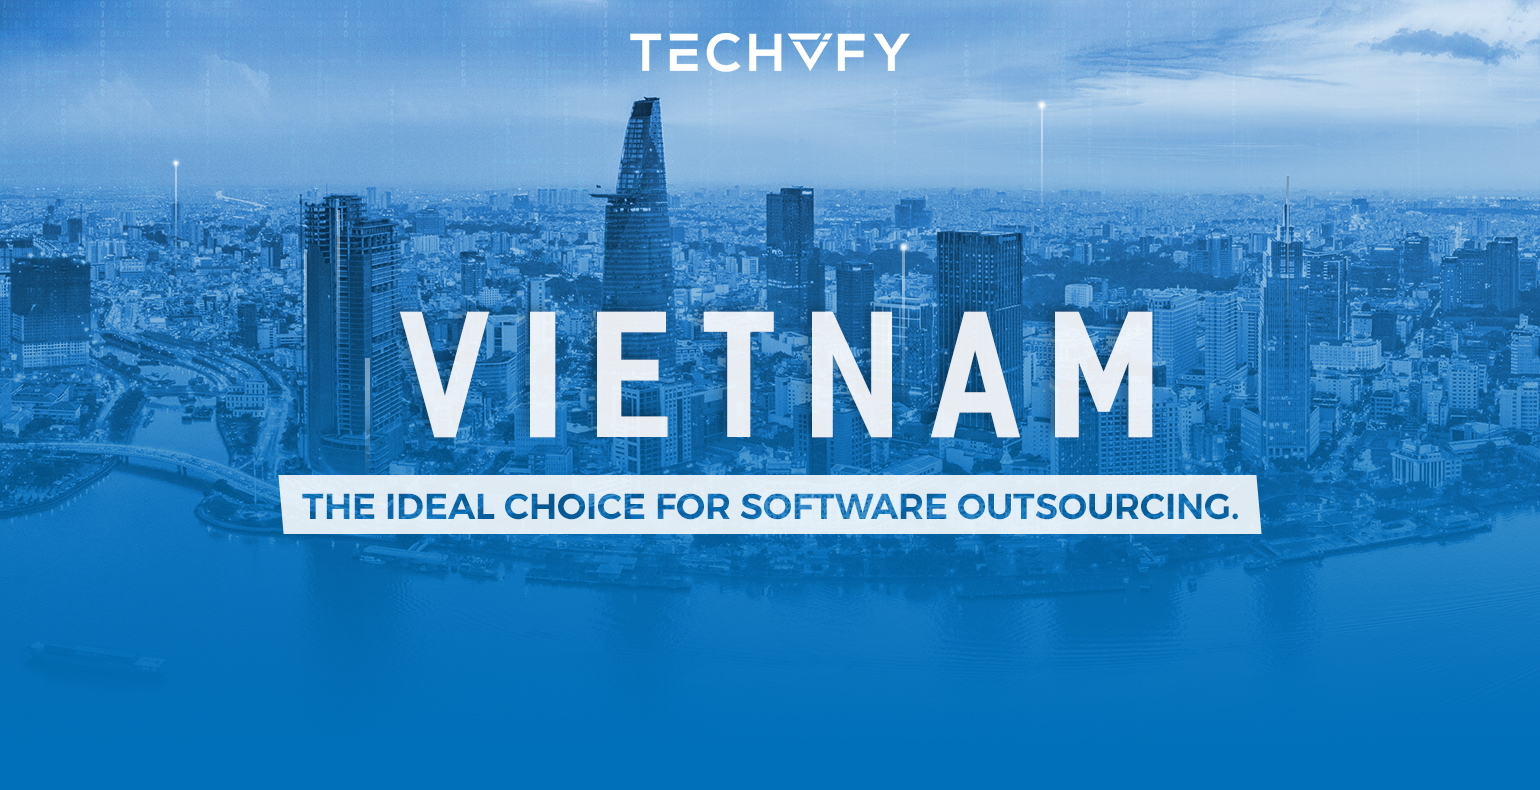 Outsourcing software to Vietnam